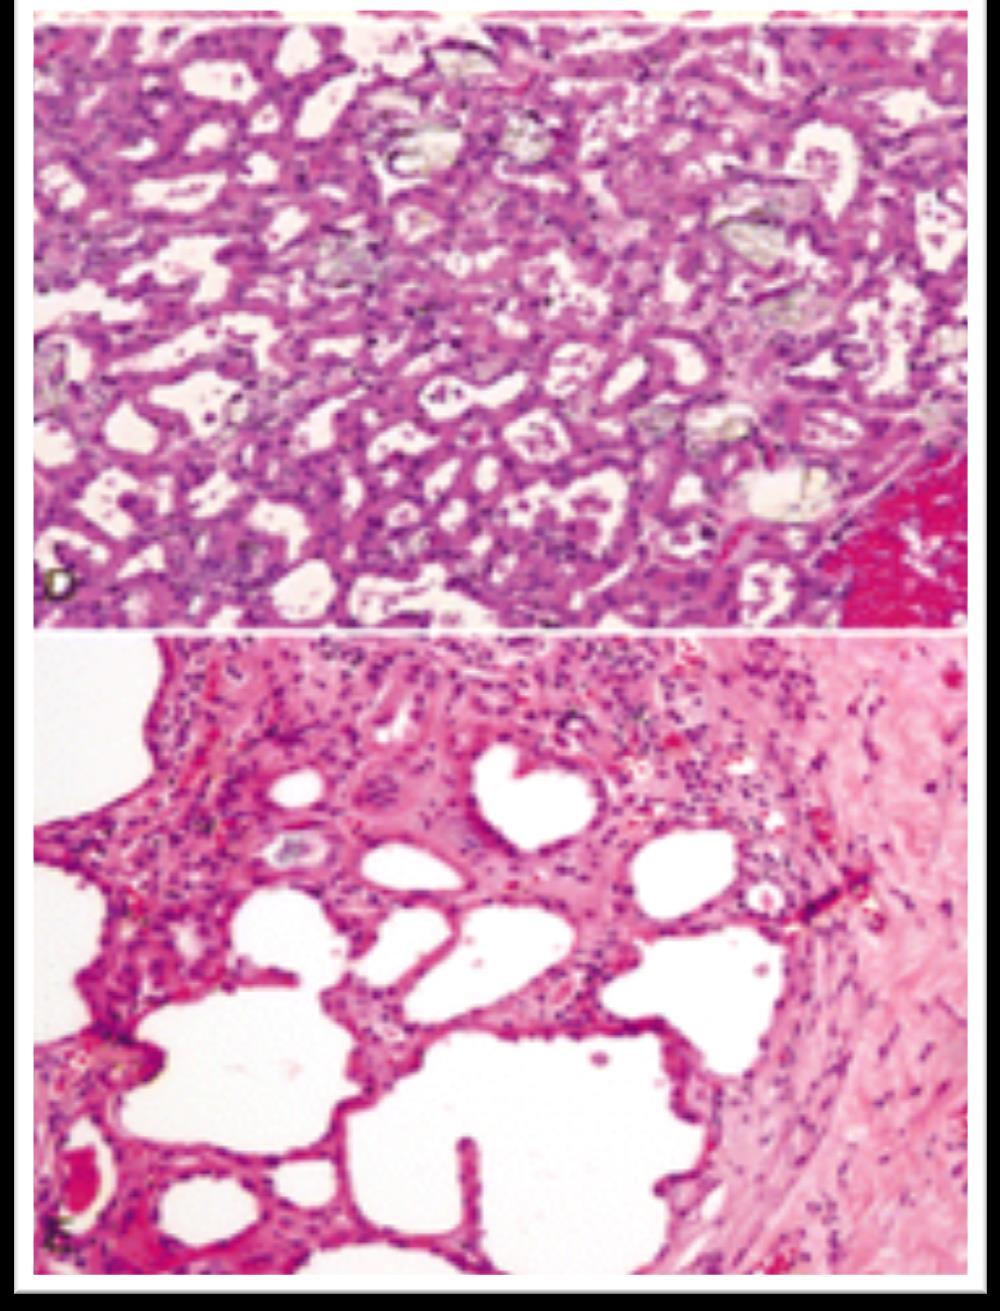 Microscopically: tumors show various combinations of acinar, solid alveolar, microcystic or macrocystic, and papillary architectural patterns.